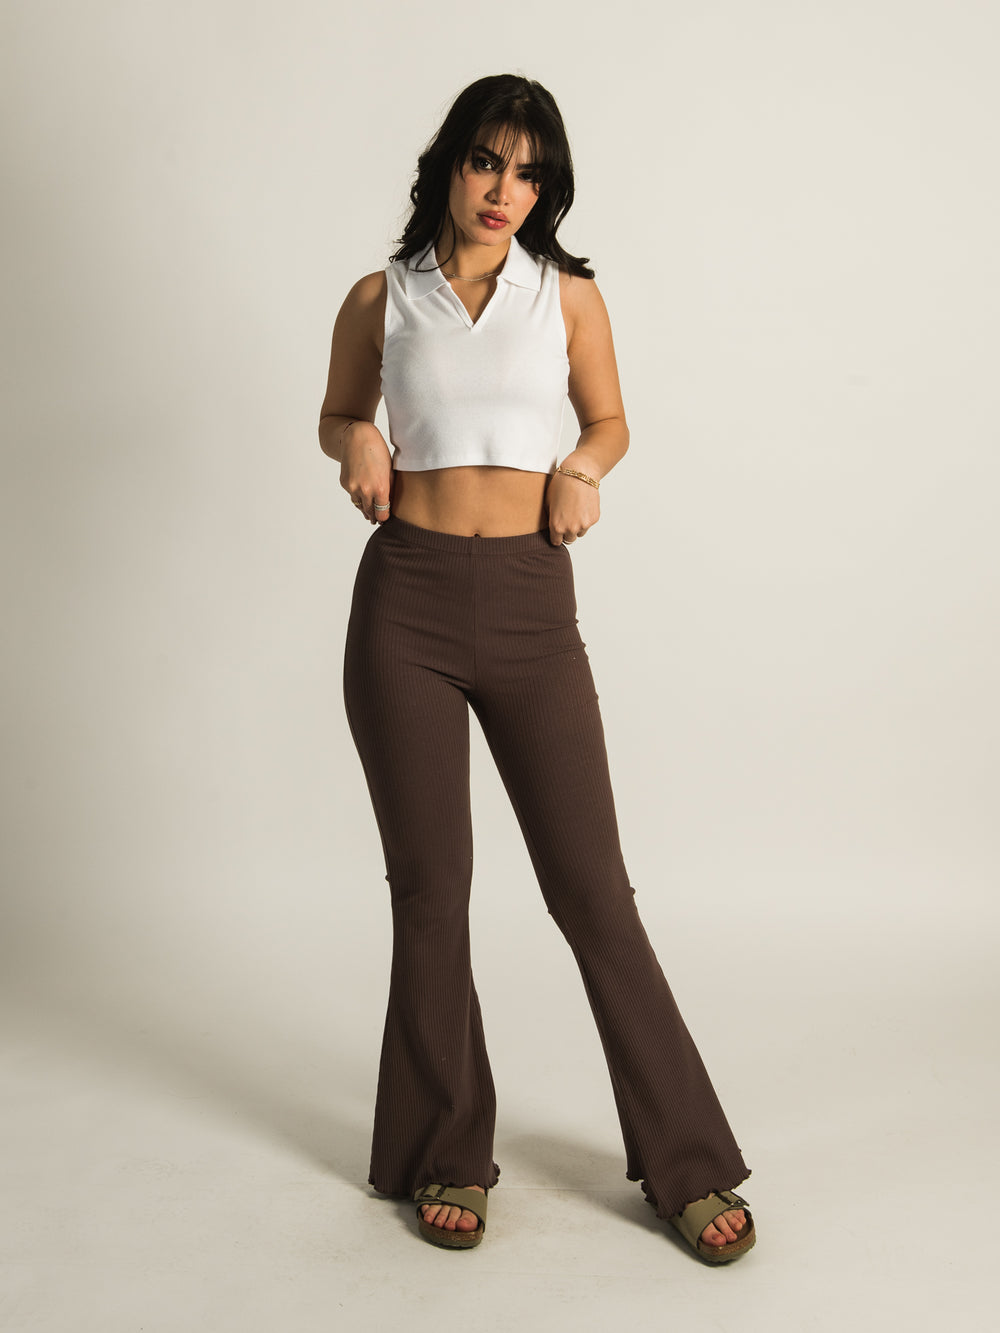 HARLOW RIBBED FLARE PANT  - CLEARANCE